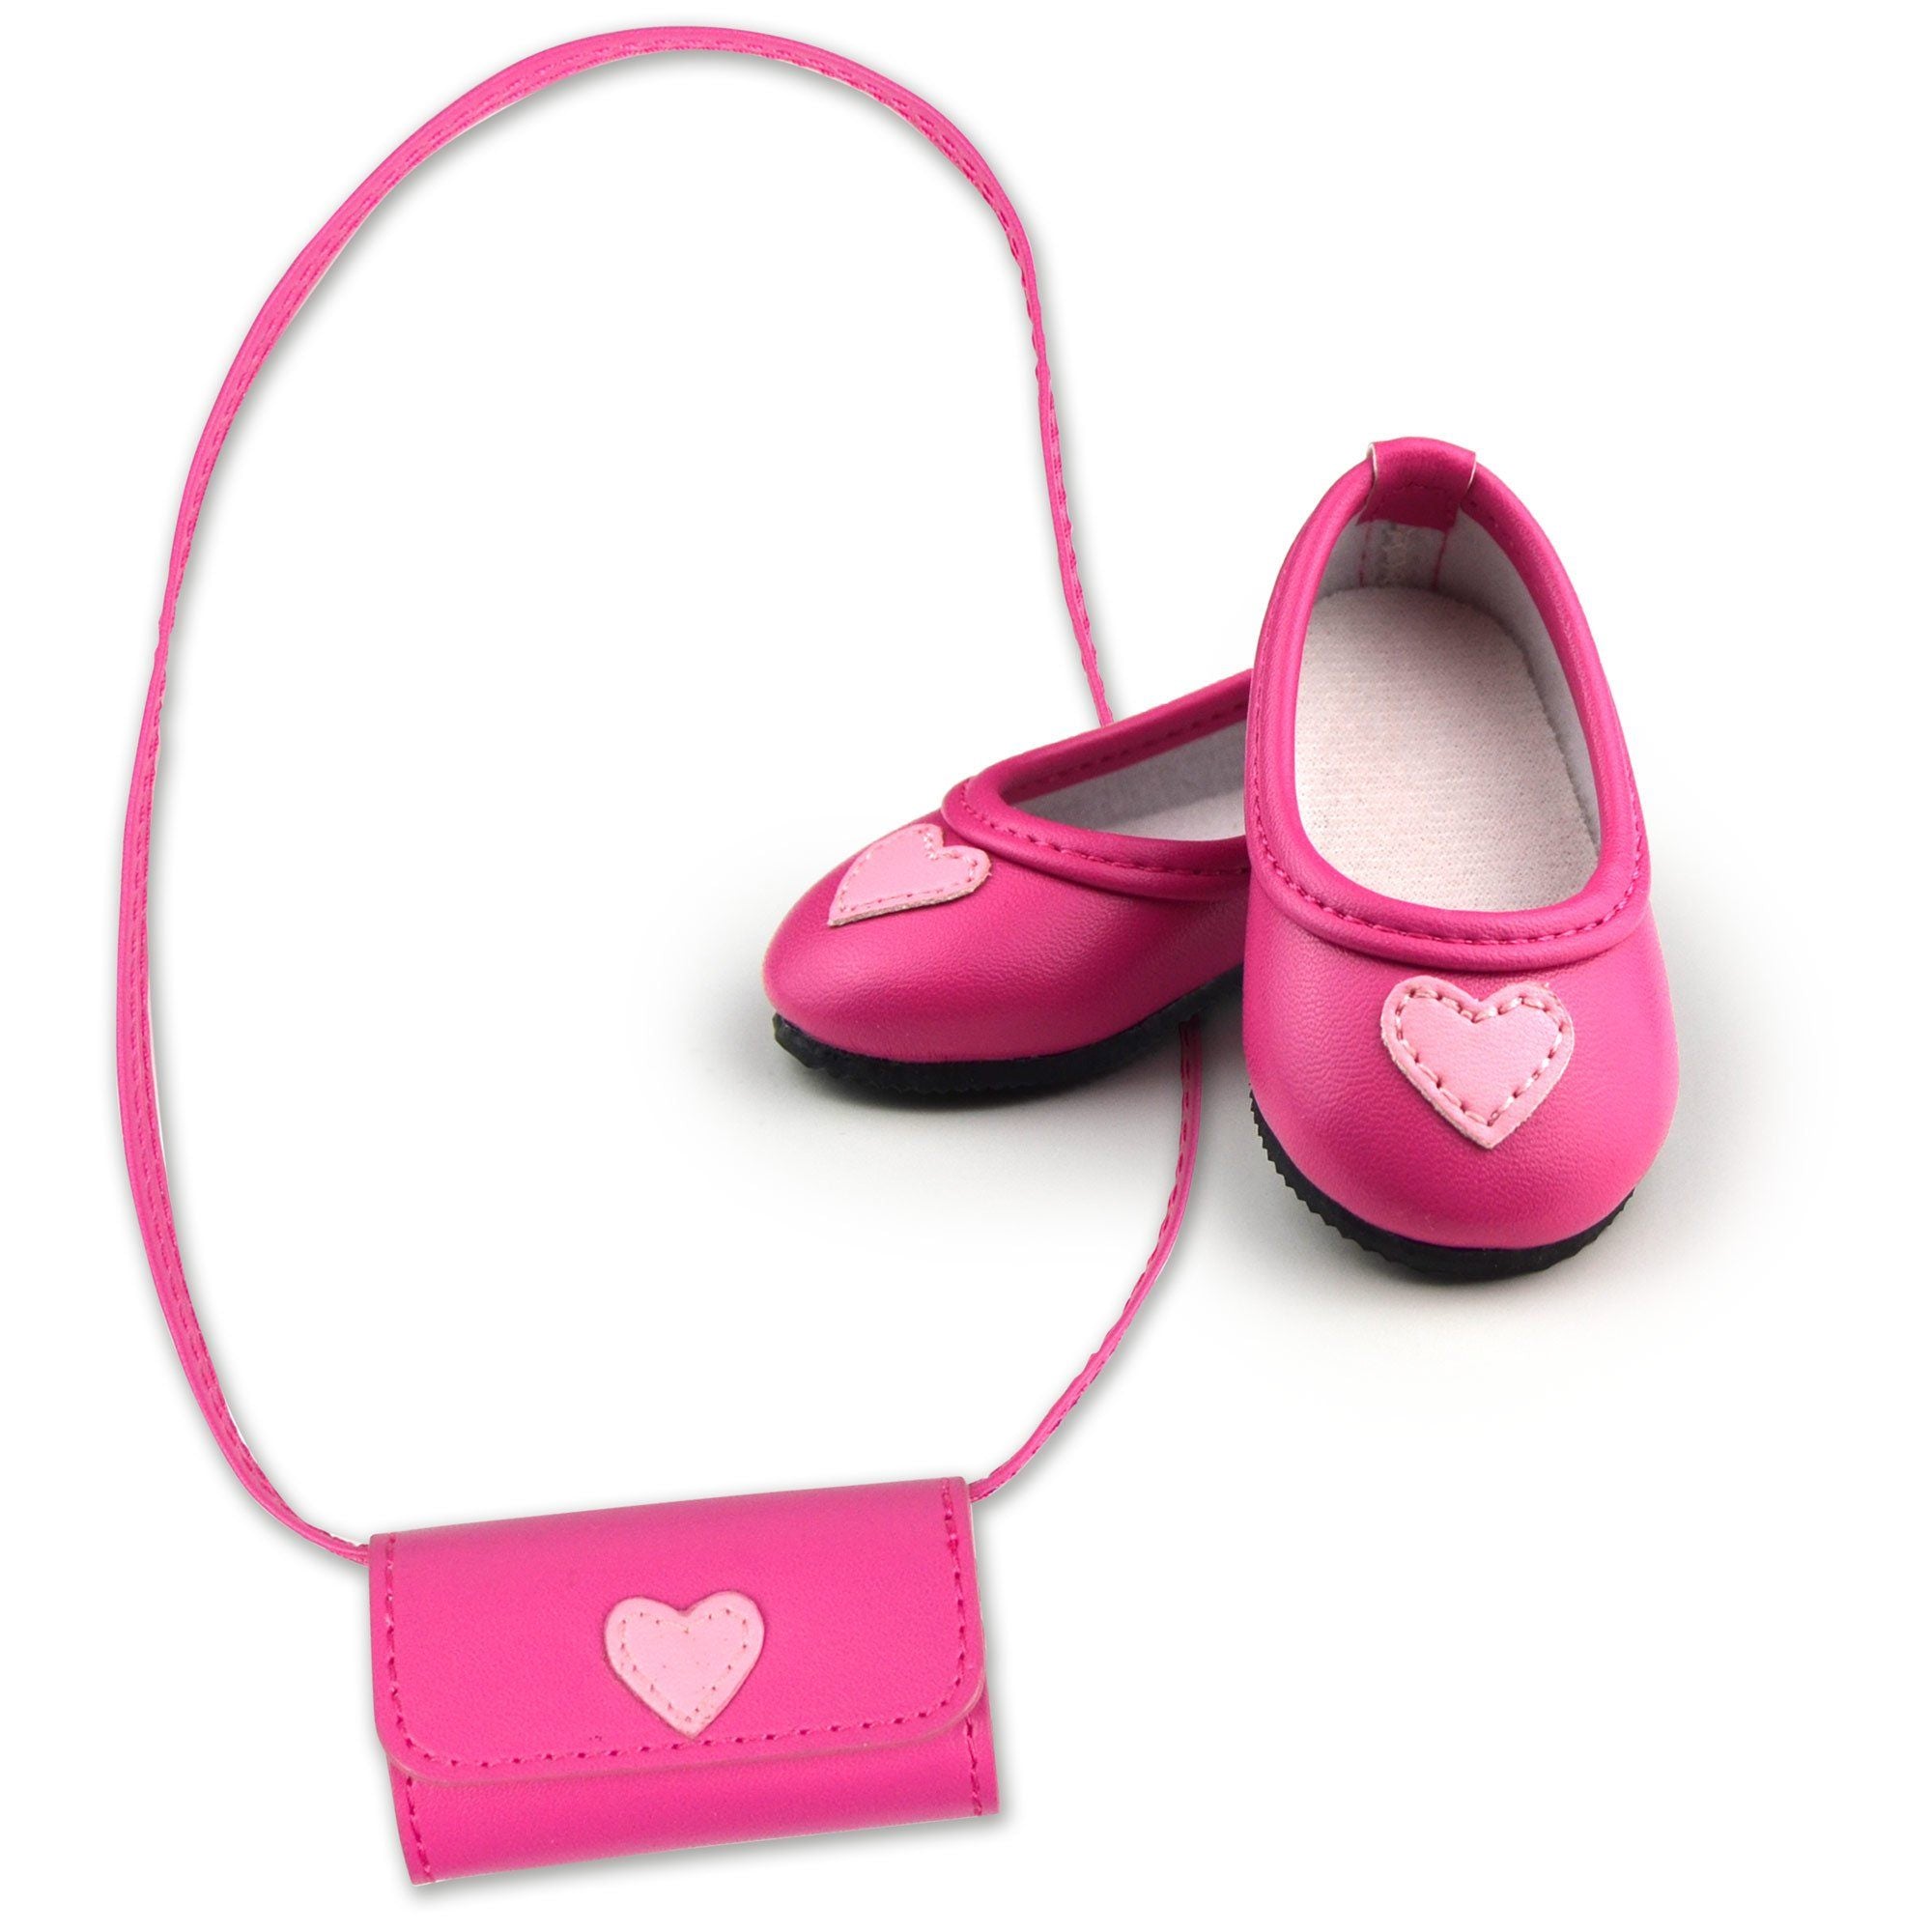 matching shoes and purse for dolls featuring hearts